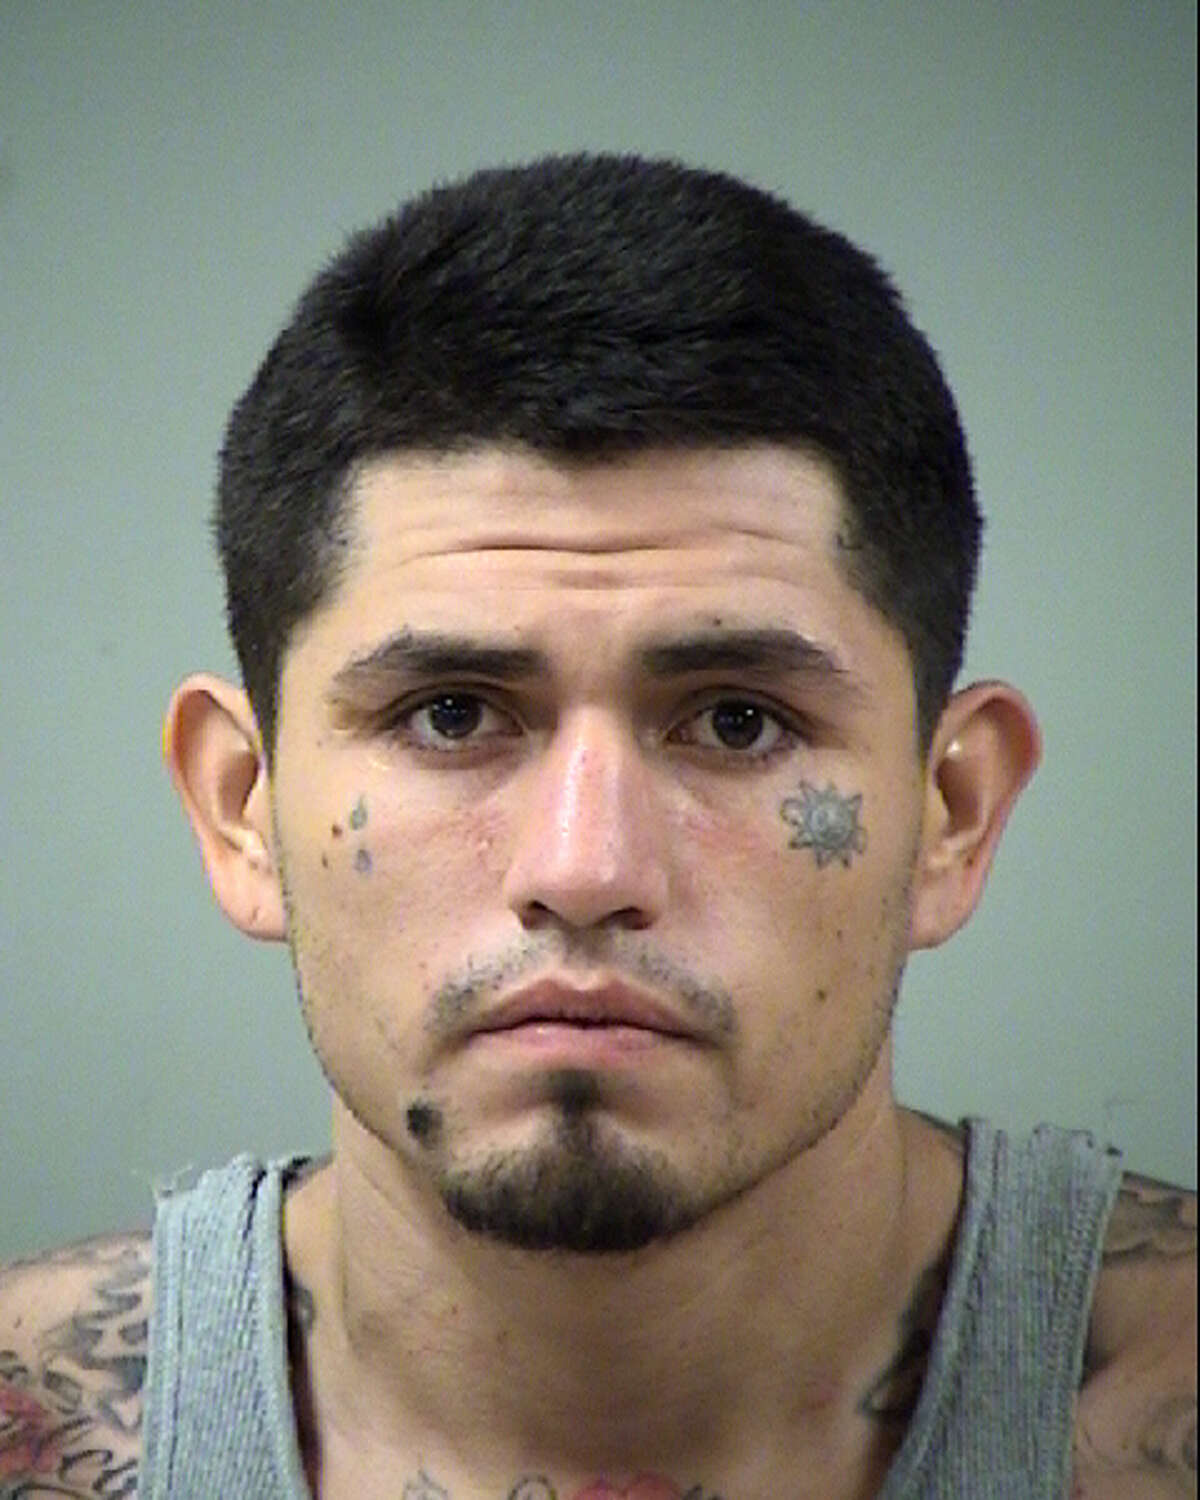 Daniel Lopez, 28, was arrested for murder Oct. 3, 2014 after police found a body wrapped in trash bags at his home.